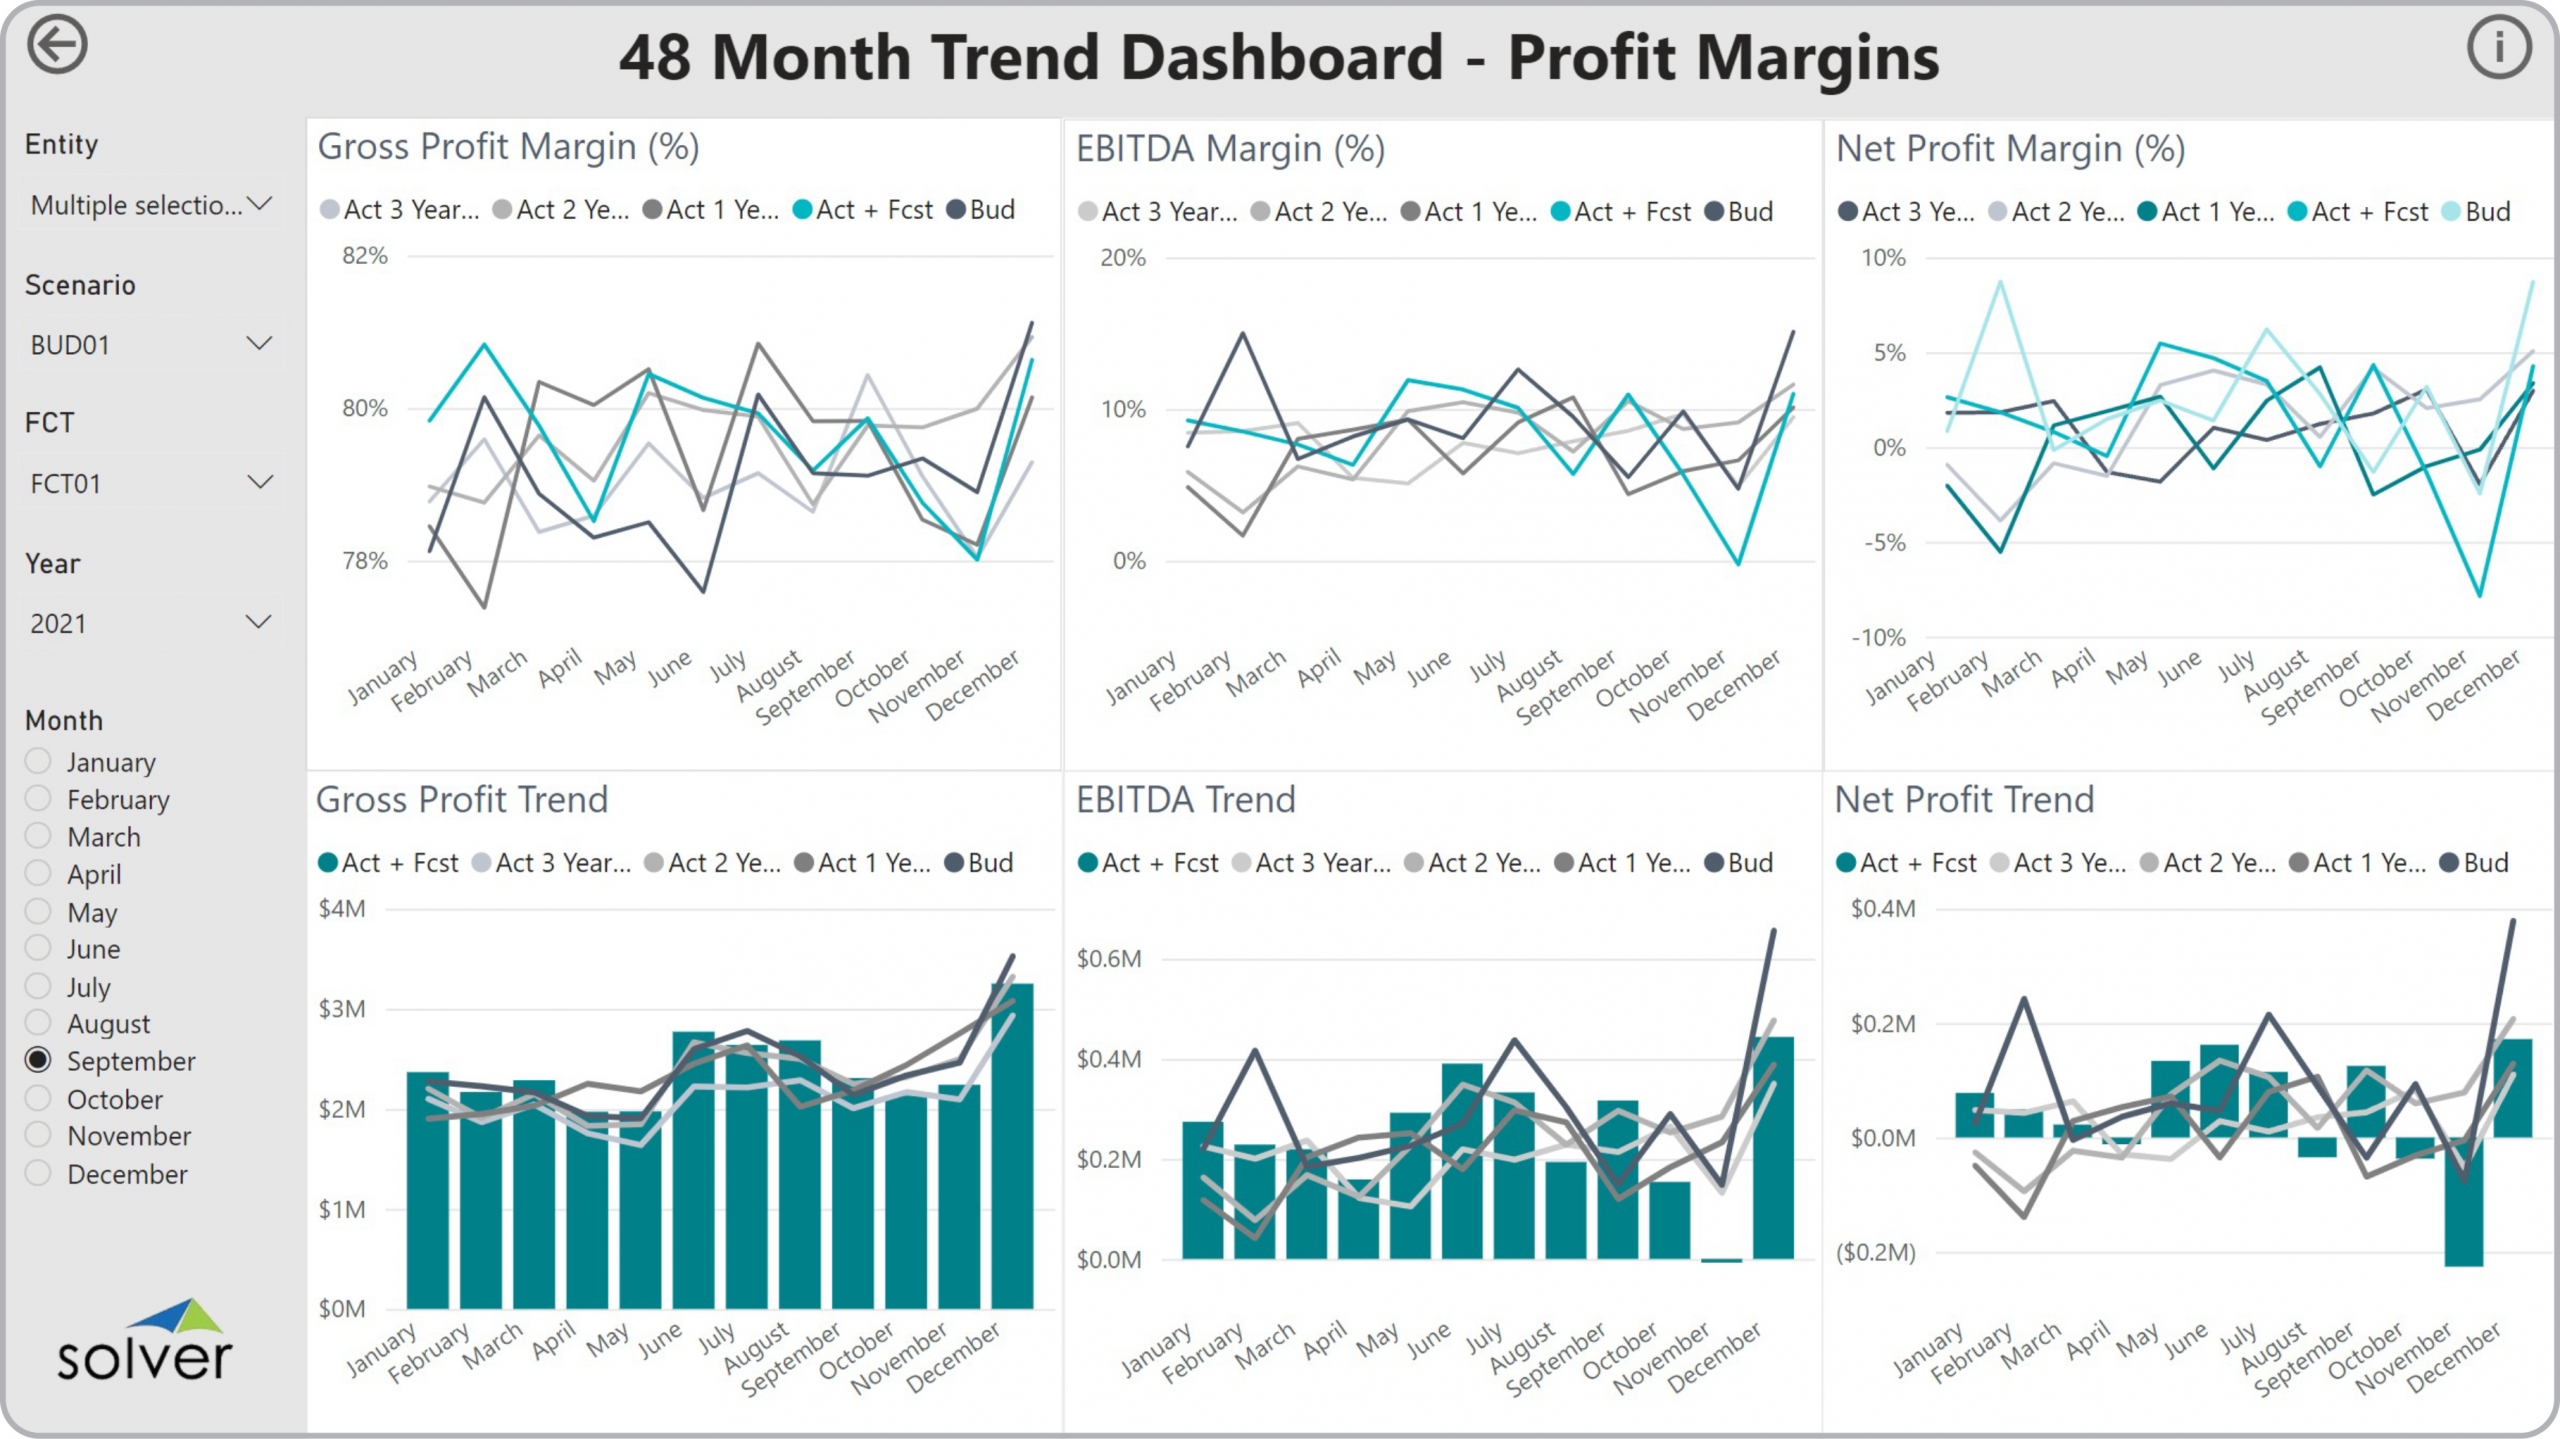 Example of a 48 Month Profitability Trend Dashboard to Streamline the Monthly Reporting Process